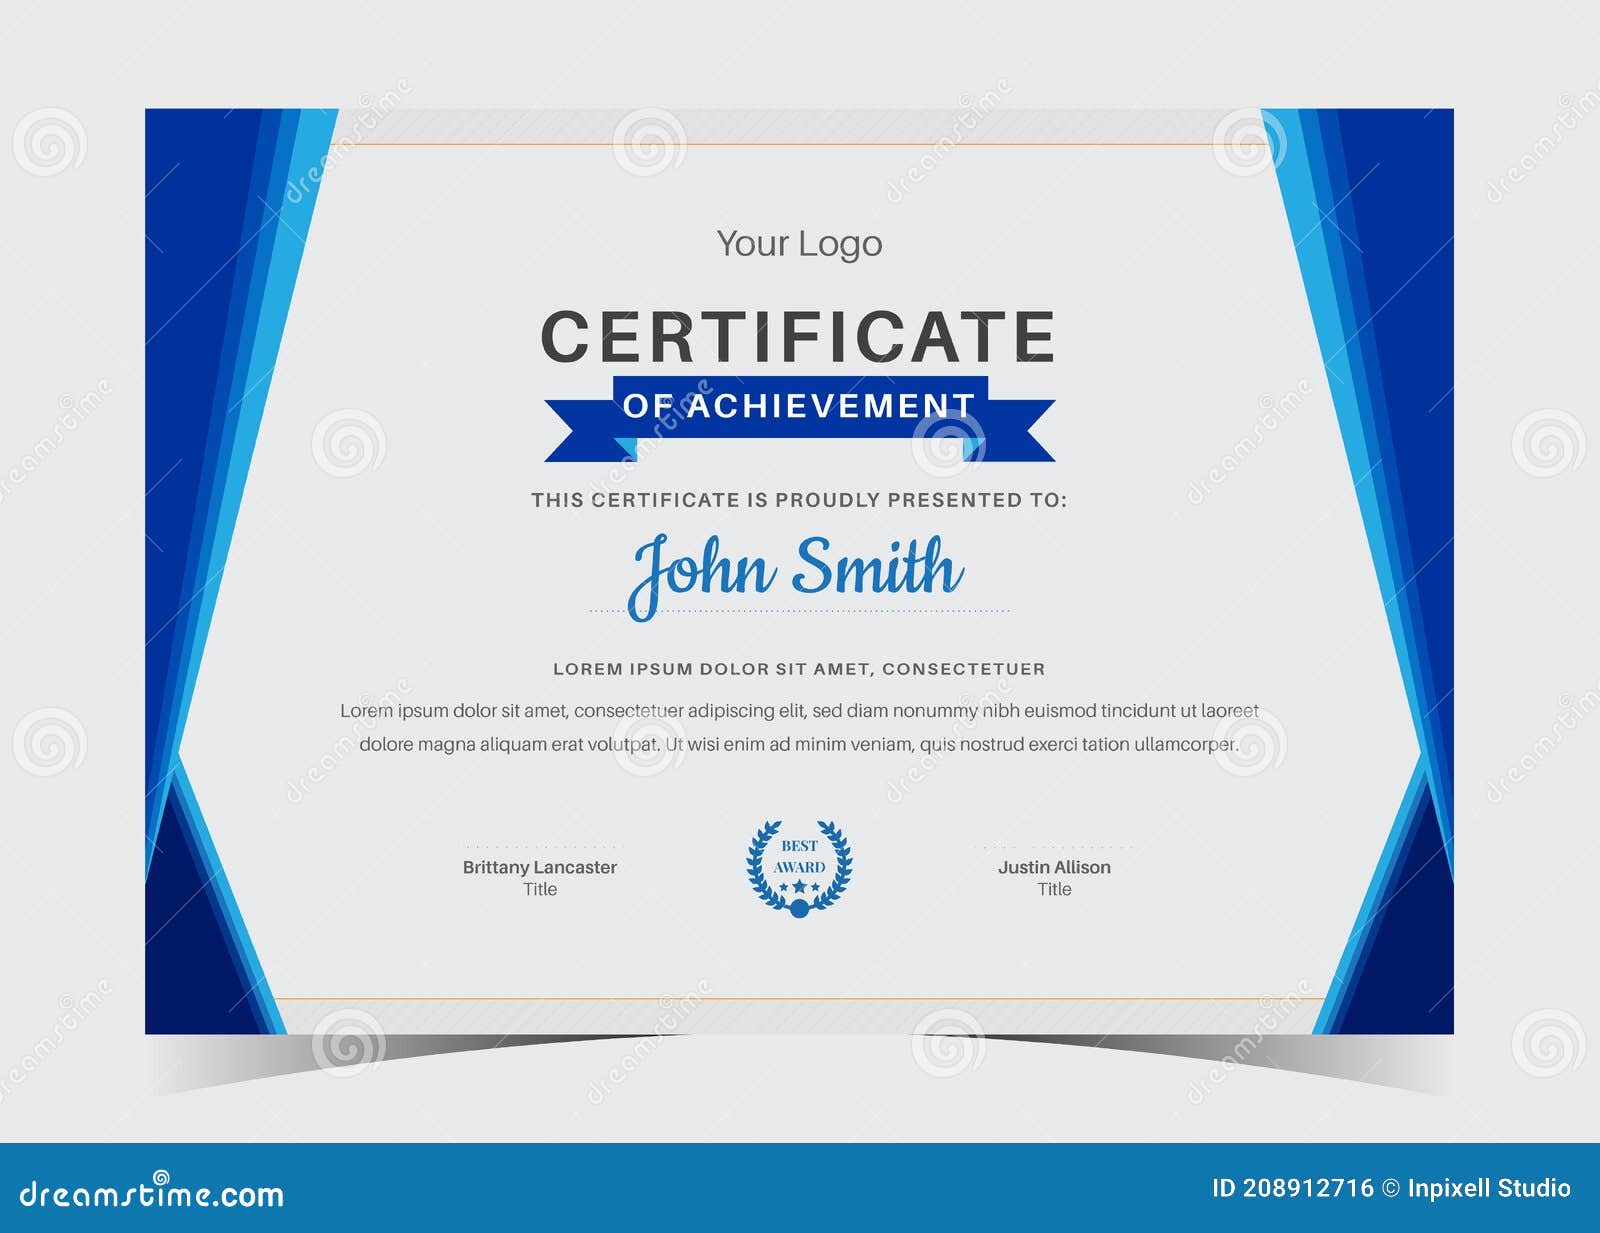 Certificate Template Awards Diploma. Minimalist Certificate Intended For Professional Award Certificate Template